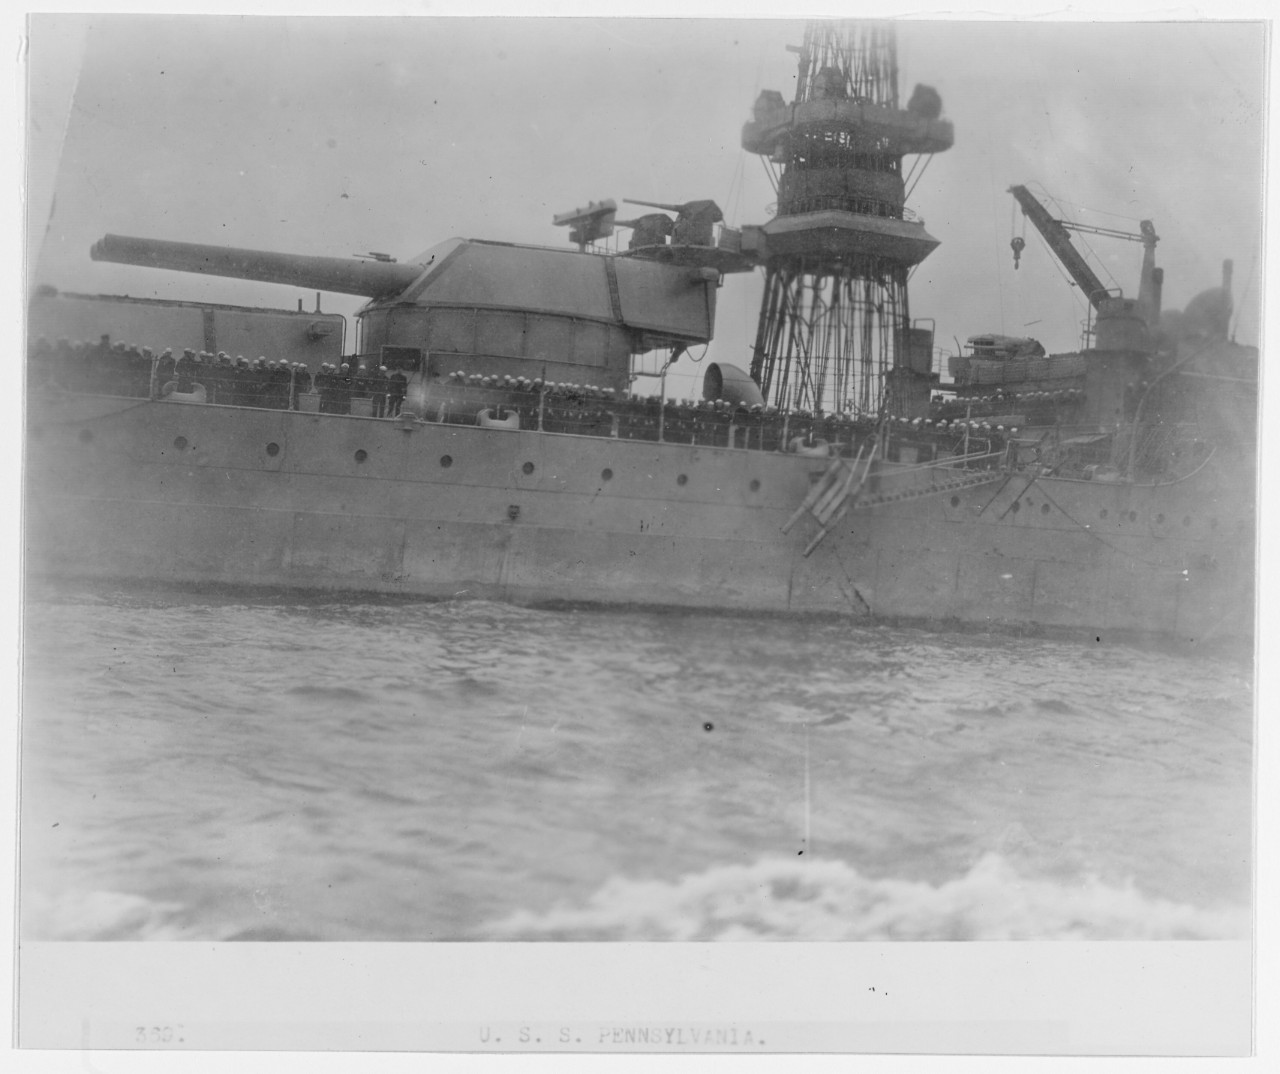 USS PENNSYLVANIA (BB-38), view of her after 14" turrets and mainmast base